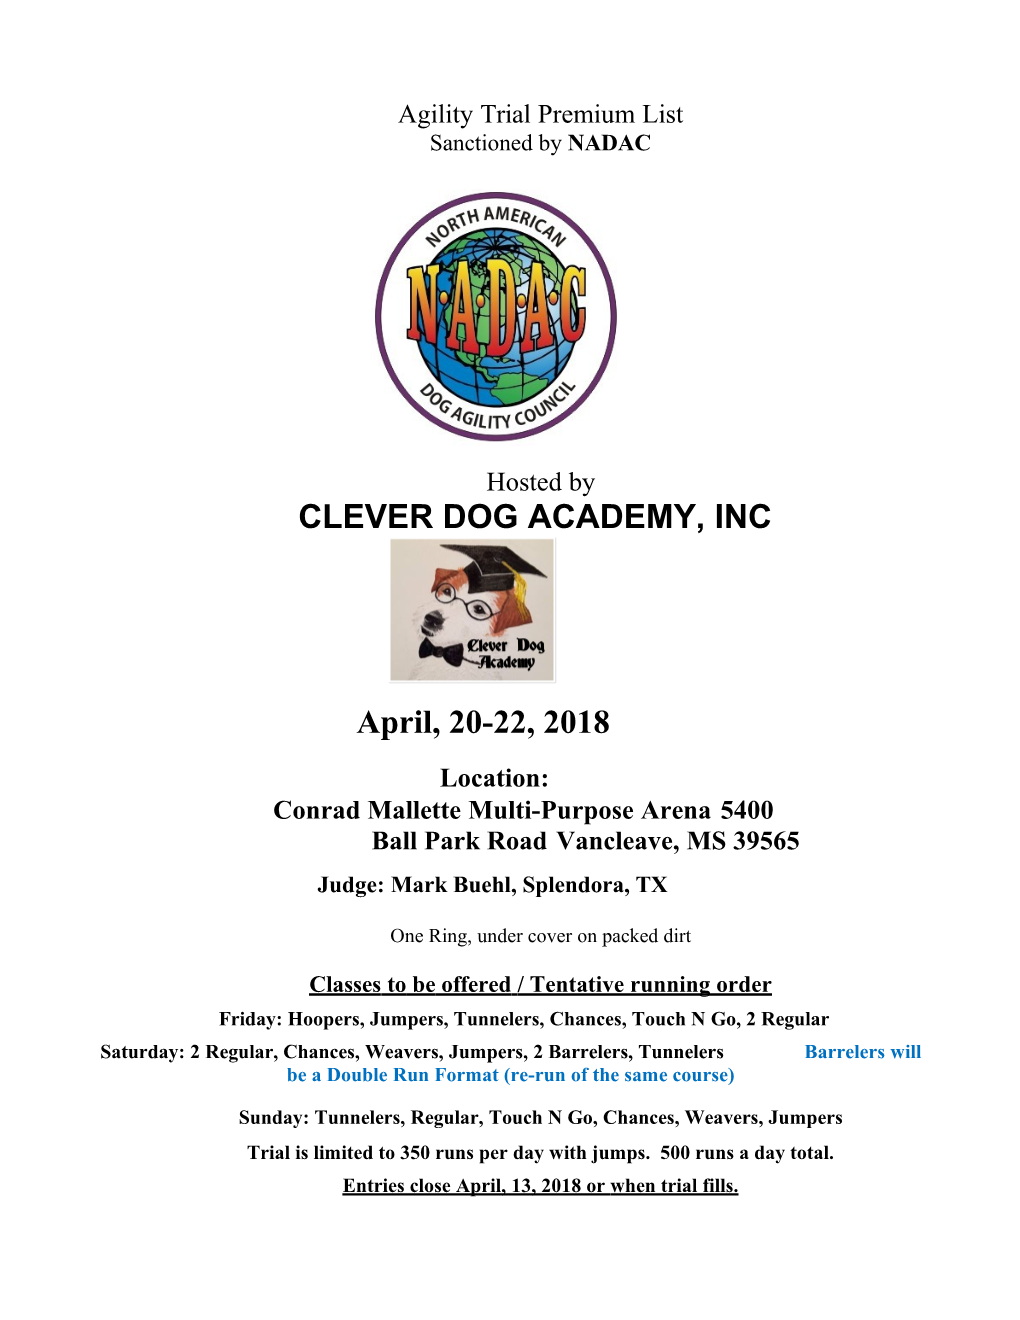 Clever Dog Academy, Inc